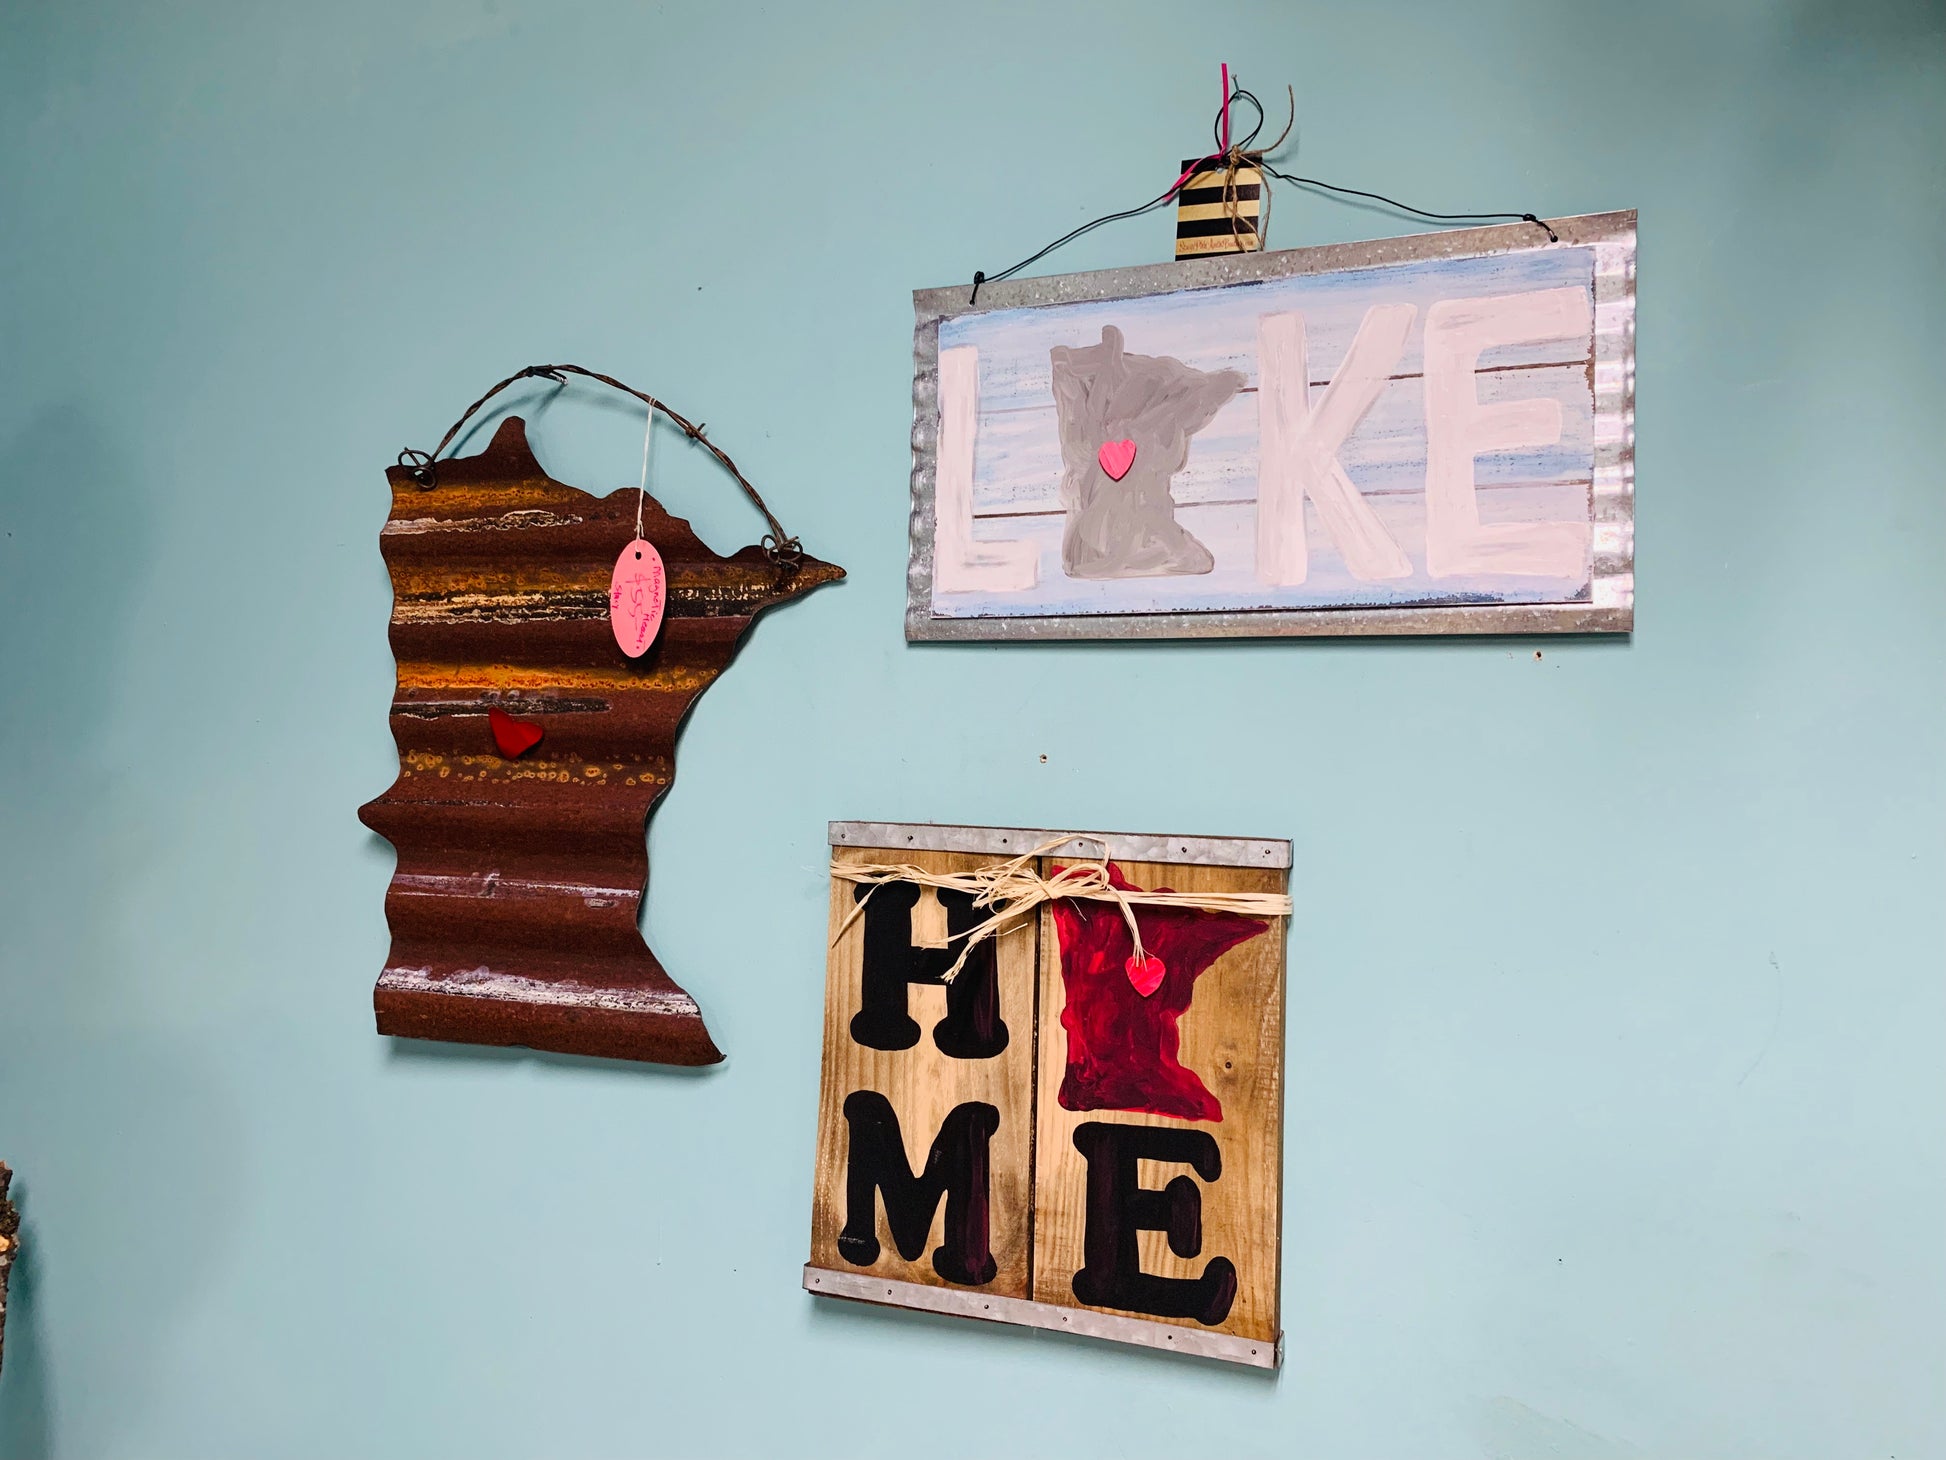 Home or lake pallet art. You choose state or lake. - Stacy's Pink Martini Boutique